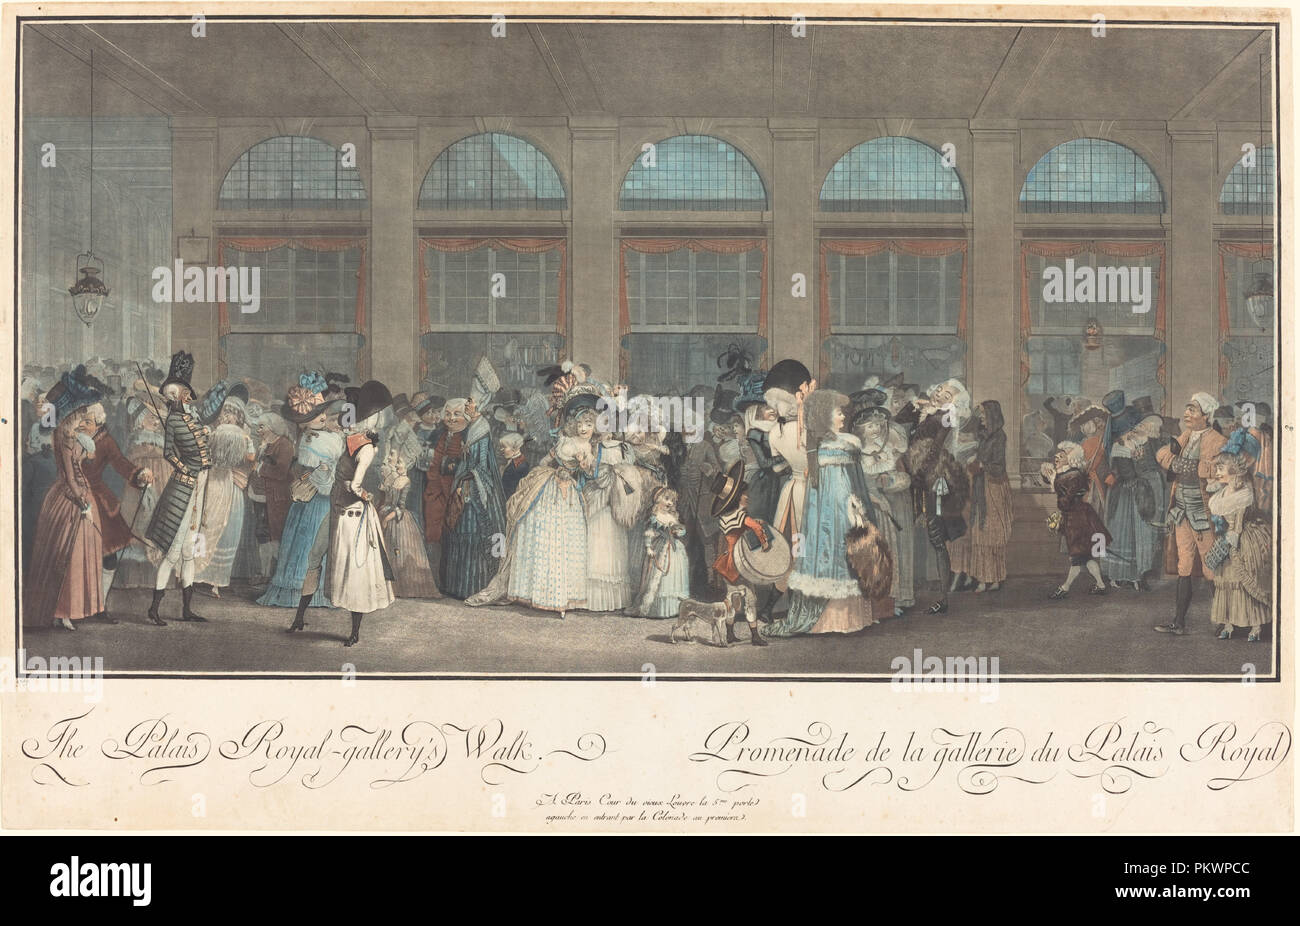 The Palais Royal - Gallery's Walk / Promenade de la Galerie du Palais Royal. Dated: 1787. Dimensions: image: 29.2 x 55.9 cm (11 1/2 x 22 in.)  sheet (trimmed at or within platemark): 36.5 x 57.1 cm (14 3/8 x 22 1/2 in.). Medium: etching and wash manner printed in yellow, red, blue, carmine, and black inks. Museum: National Gallery of Art, Washington DC. Author: Philibert-Louis Debucourt after Claude-Louis Desrais. Stock Photo